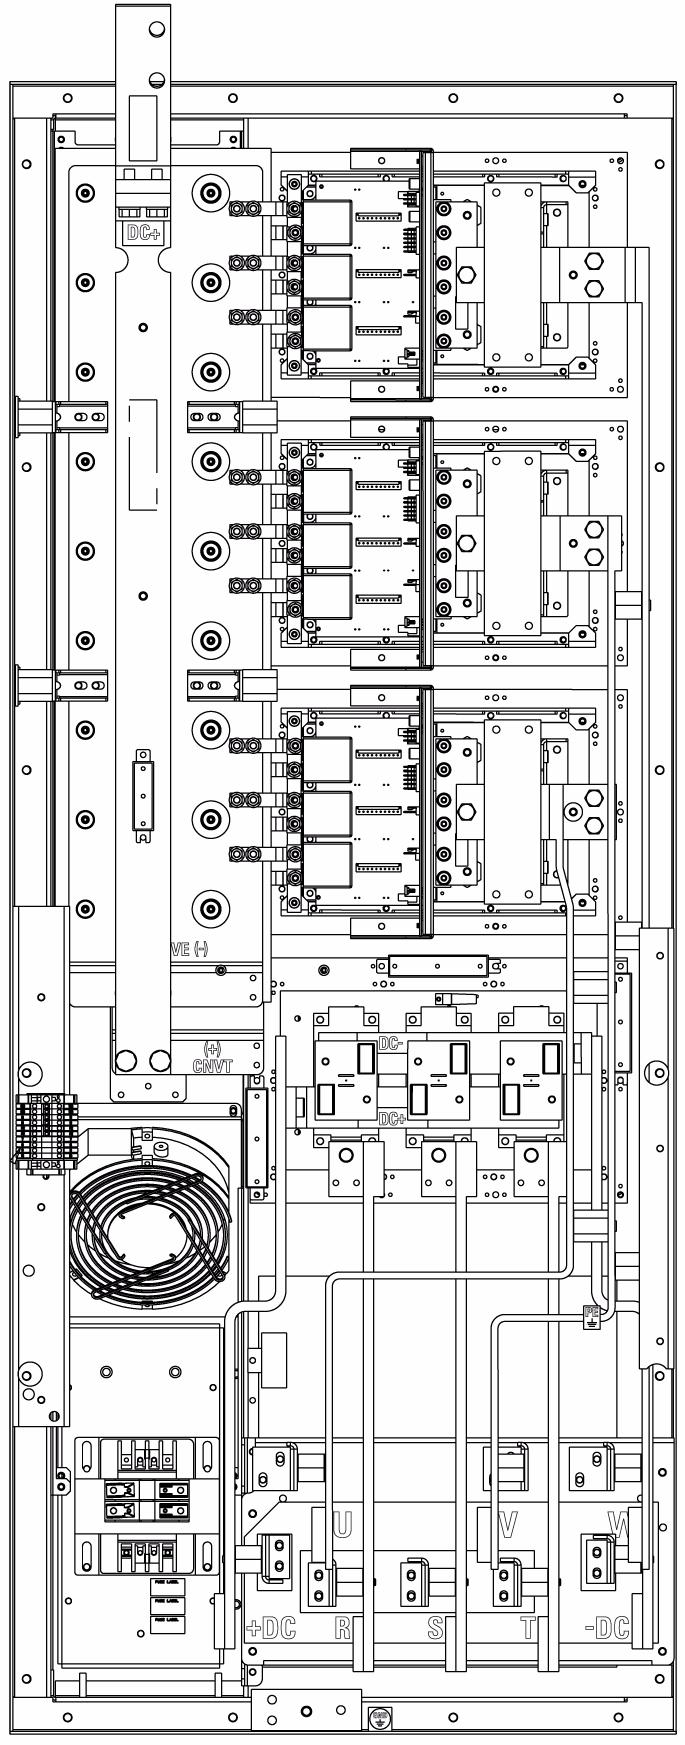 Chapter 1 Component Diagrams and Torque Specs Drive Shown With Stacking Panel Removed Figure 1 - Frame 9 - AC Drive Components Gate Interface Board (3) Transitional Busbar Current Transducer (3)